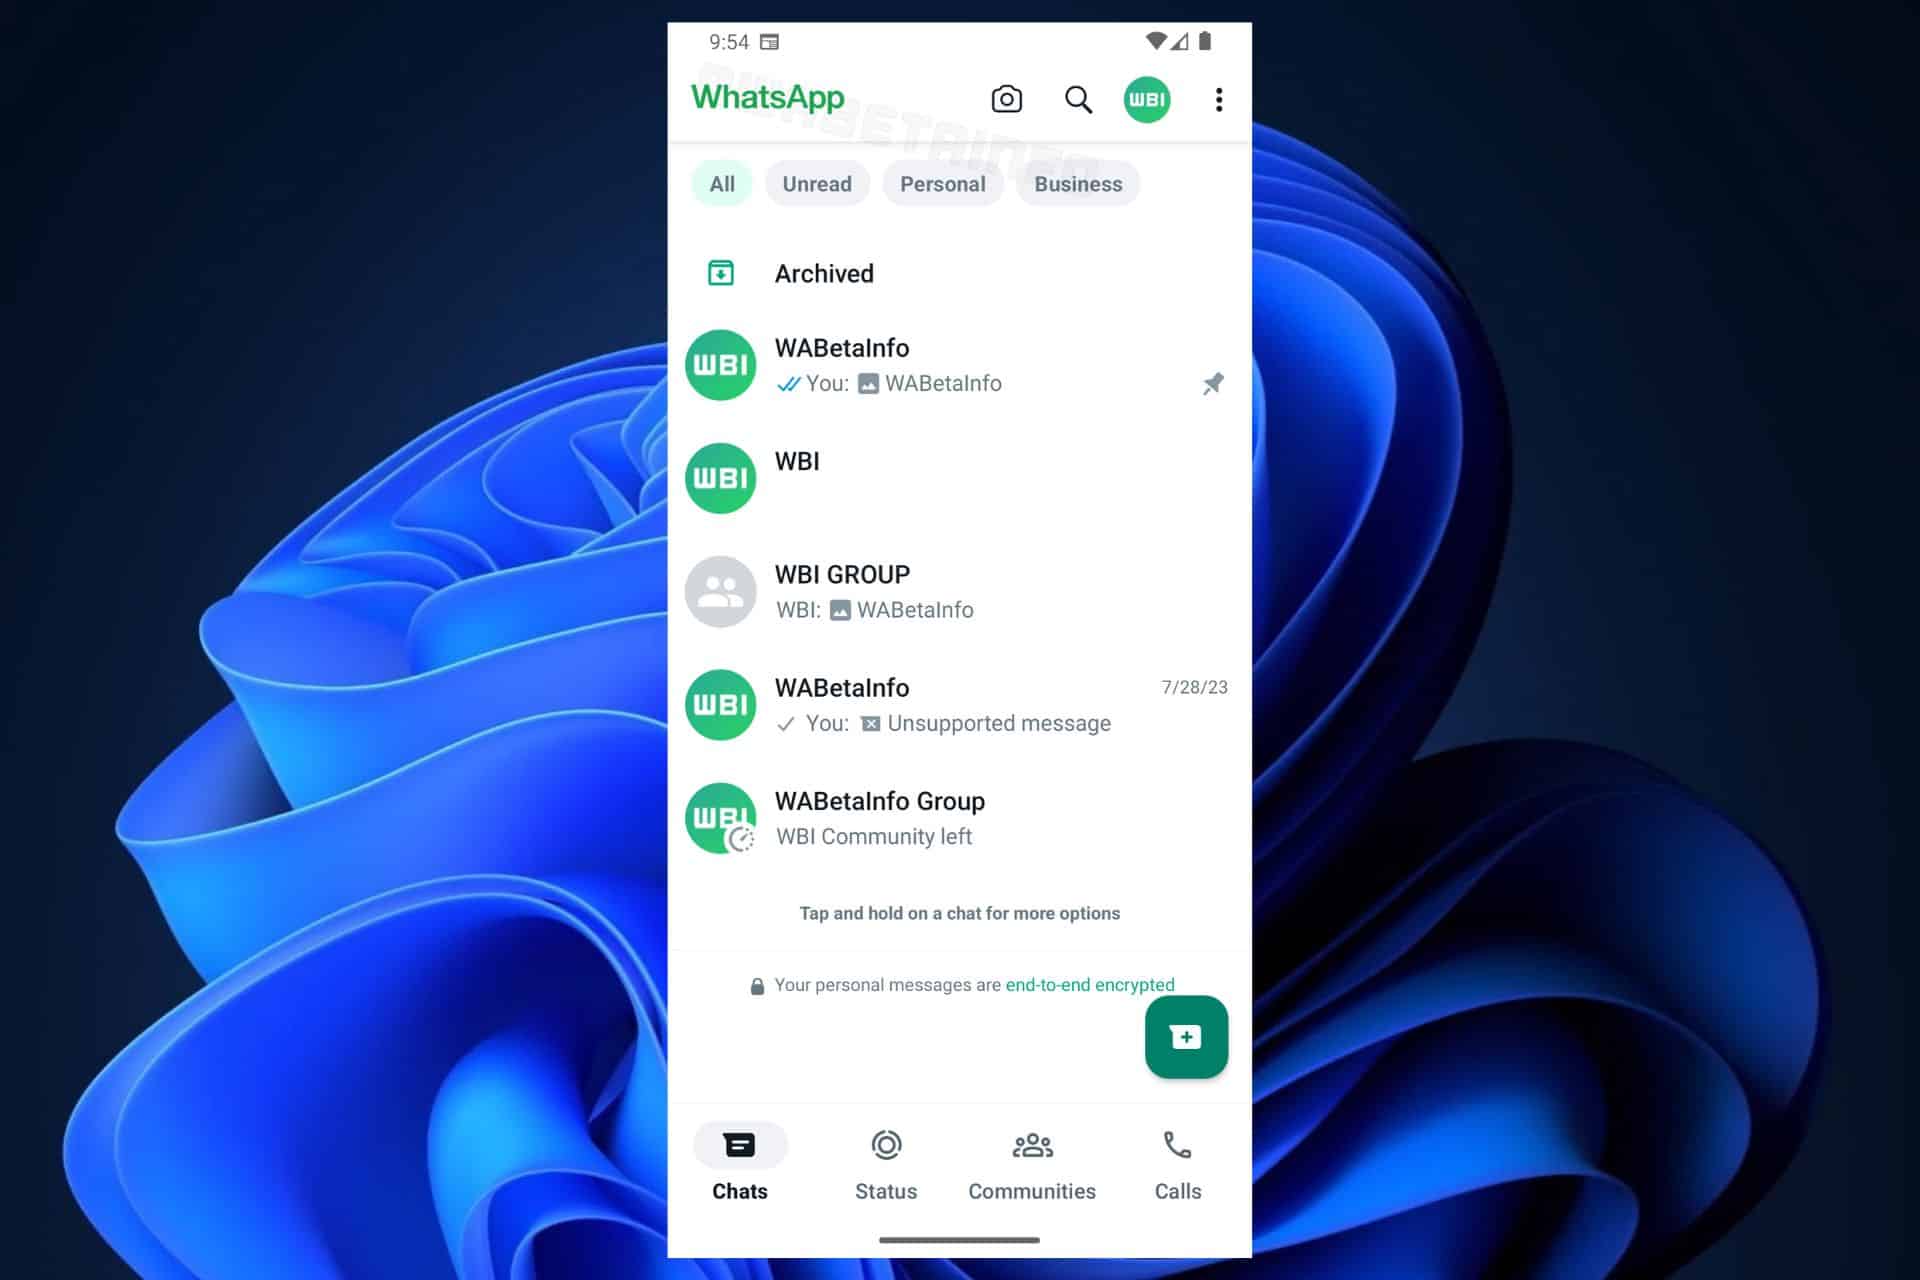 WhatsApp Interface on Android is getting a new design, coming later in 2023